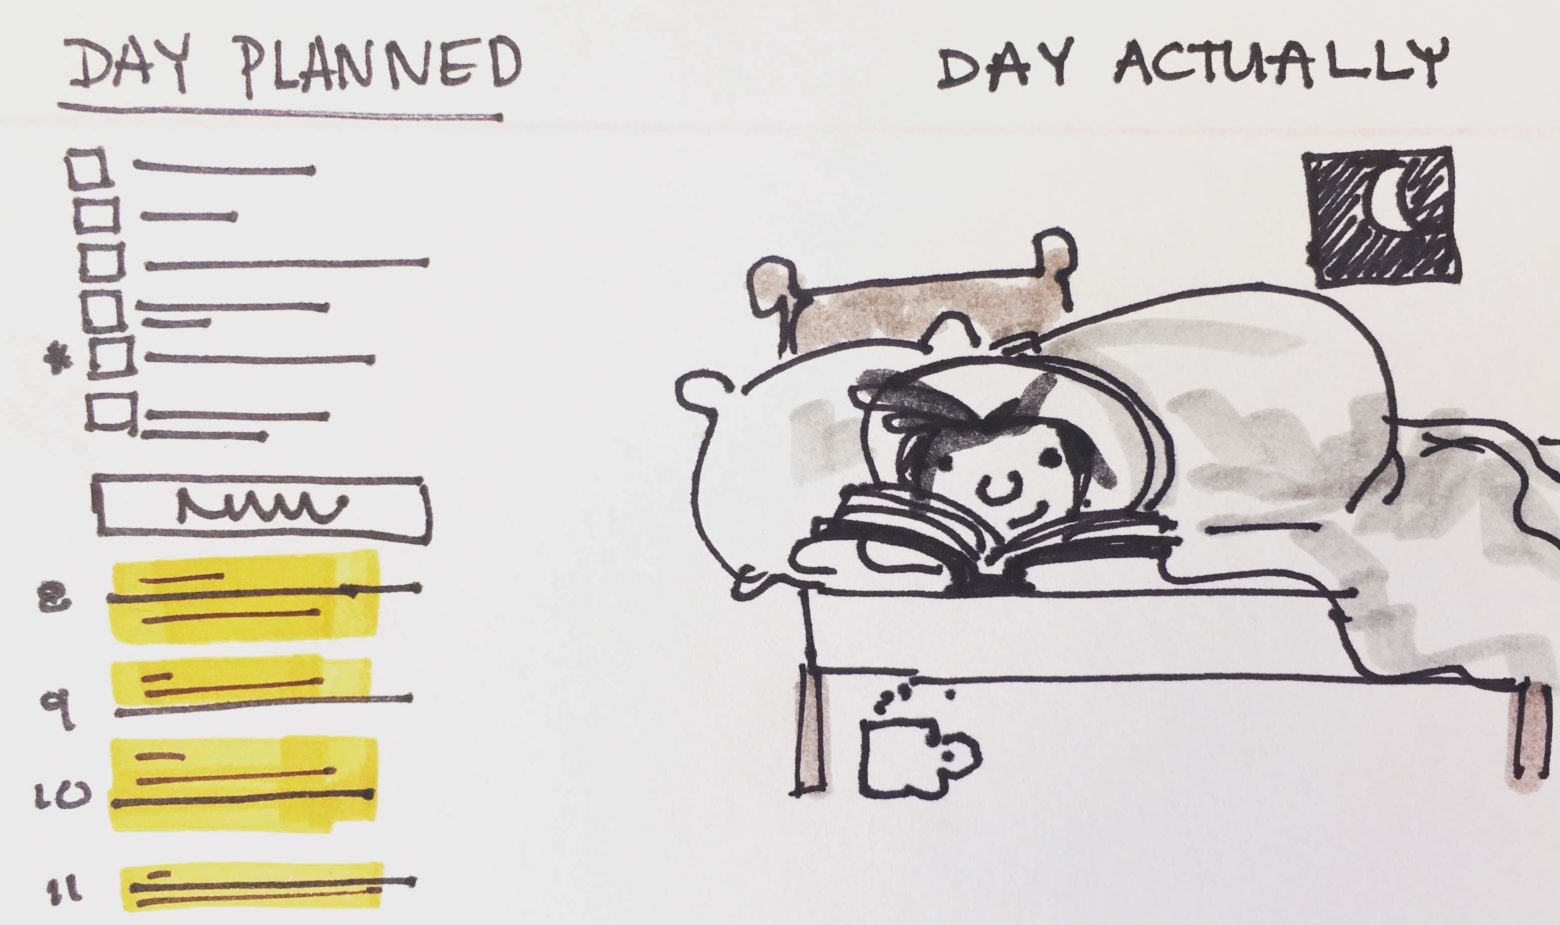 Drawing. Left side is labeled "Day Planned" and shows abstracted to-do list and busy calendar. Right says is labeled "Day actually" and shows someone curled up in bed under the blankets reading a book with a cup of tea on the floor and it's already night.